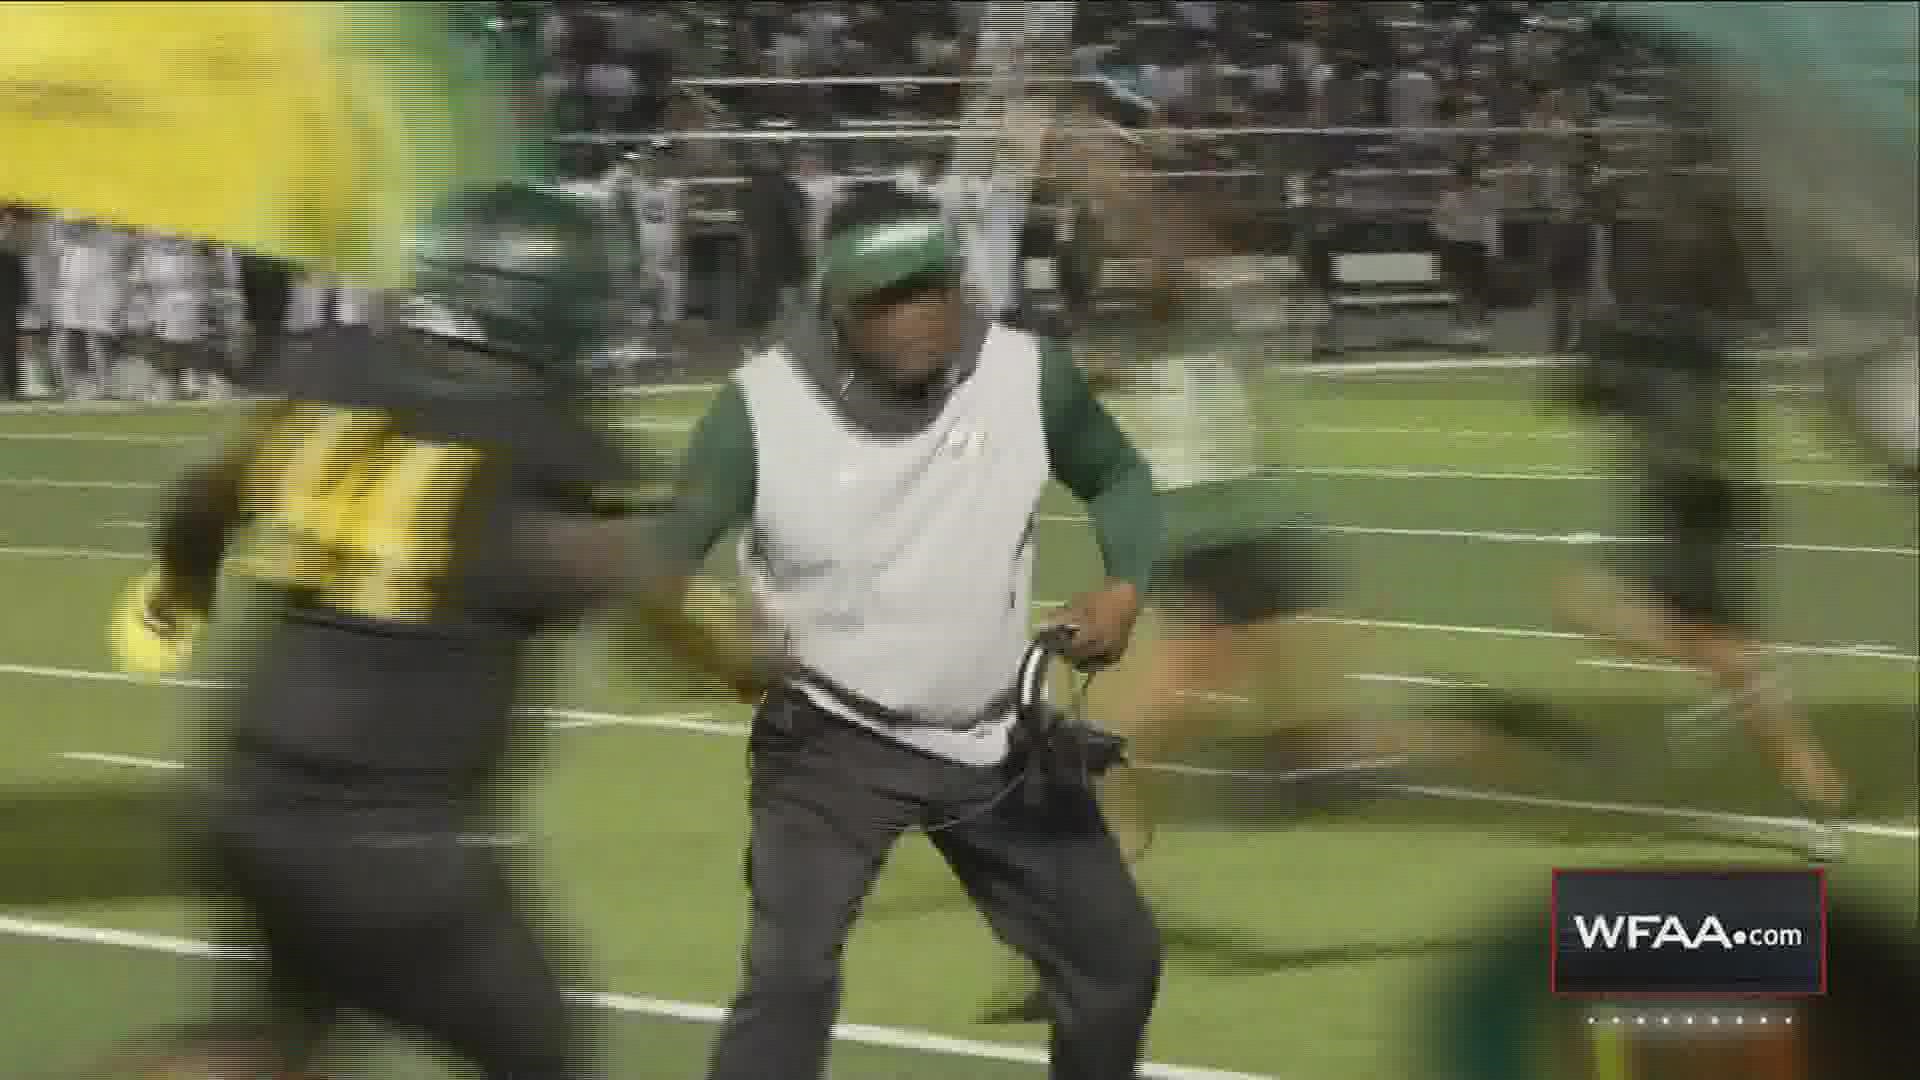 Desoto jumped out to an early lead and never relinquished it as they beat Waxahachie in a ranked matchup.